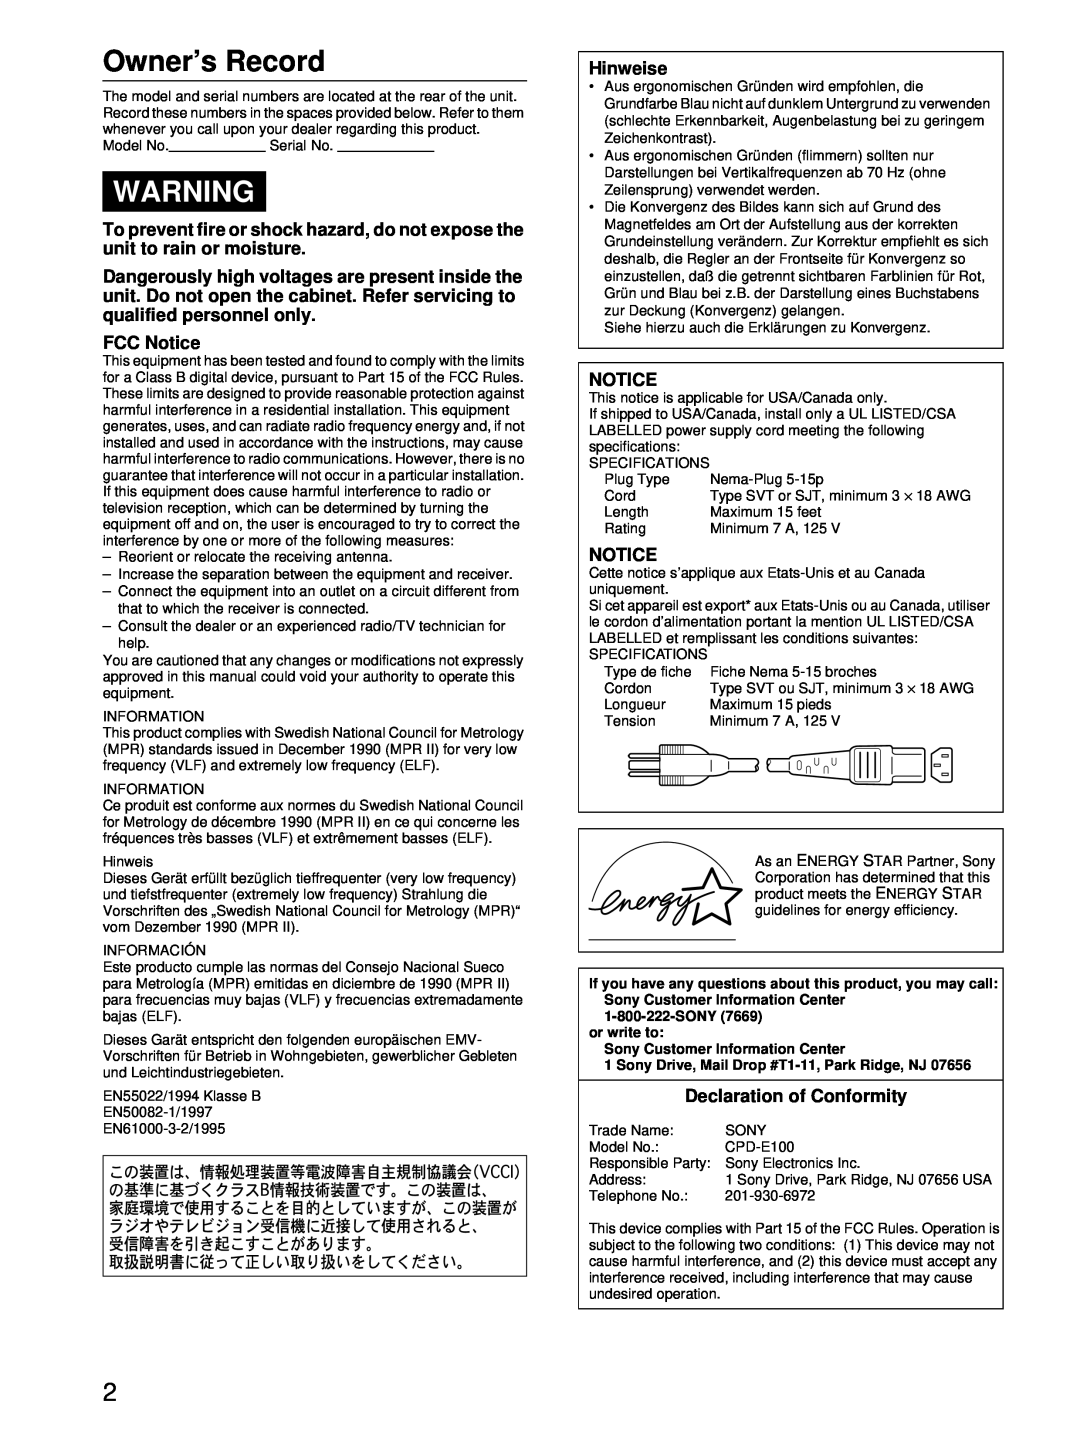 Sony CPD-E100 manual FCC Notice, Hinweise, Owner’s Record 